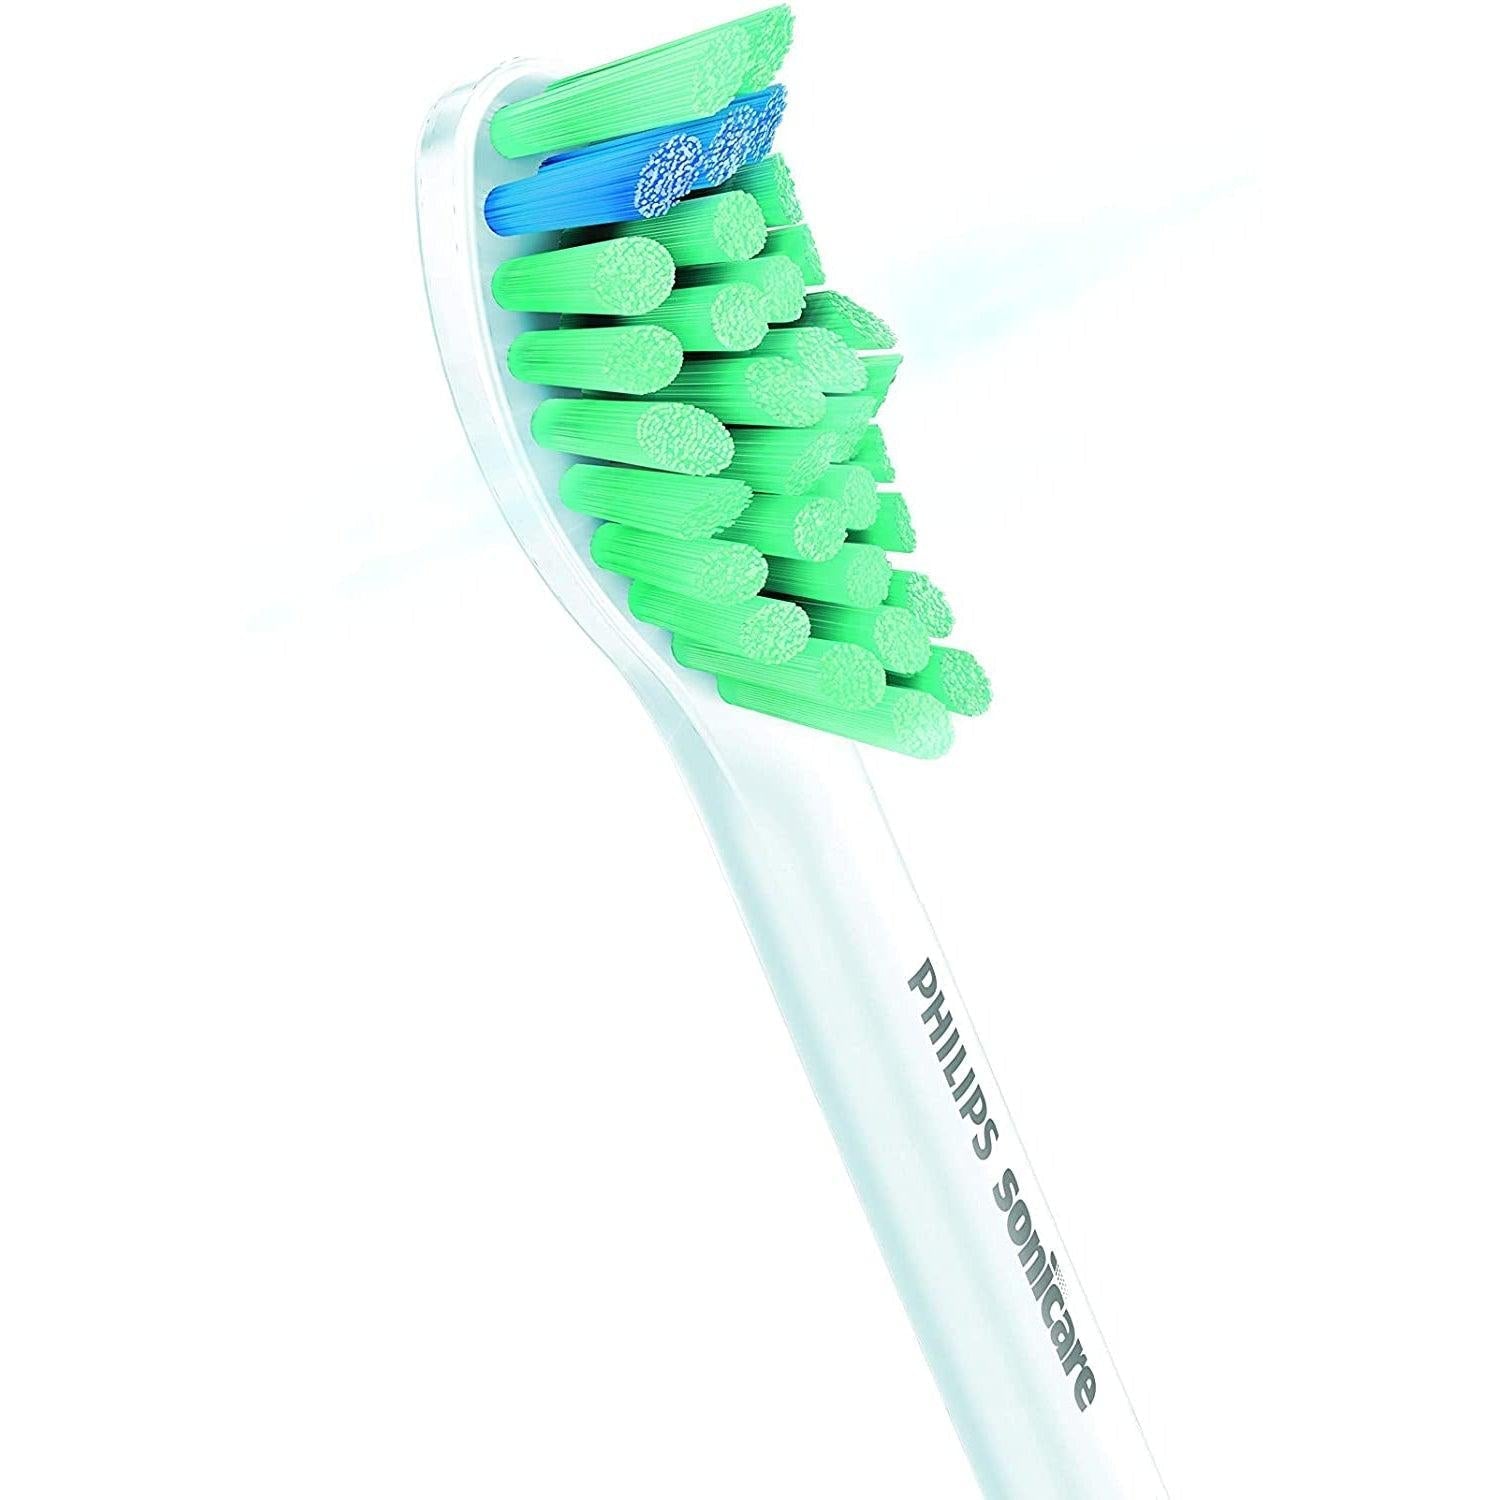 Philips Sonicare ProResult HX6018/07 Standard Sonic Toothbrush Heads - Pack of 8 - Healthxpress.ie